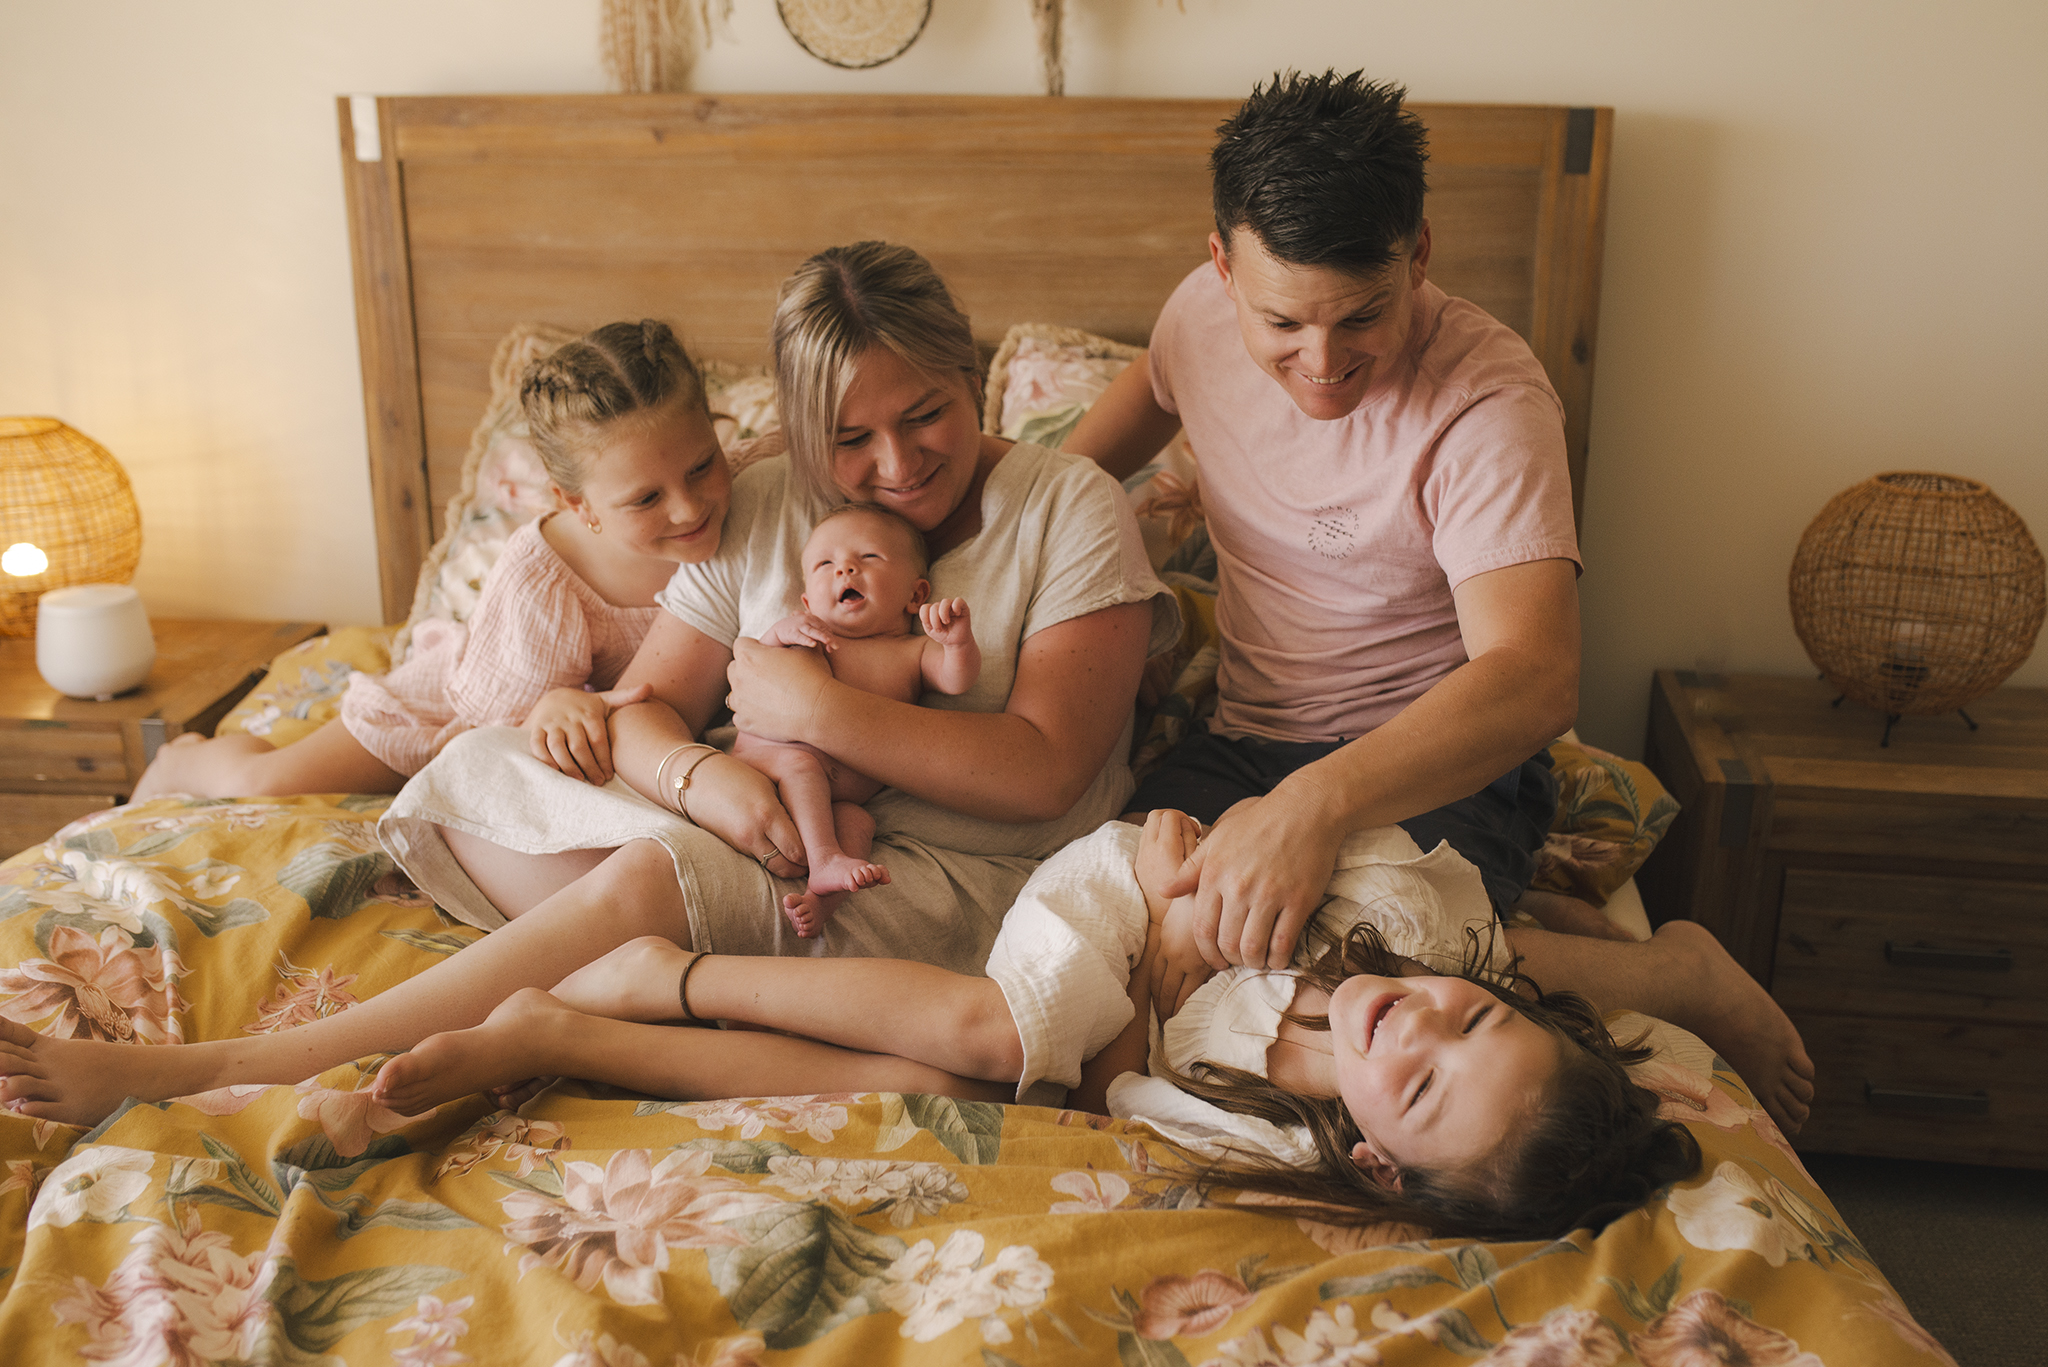 A family newborn photo. The family are sitting on a large oak timber bed with mustard & soft pink floral linen. They all sit cuddled together Mums arms around a newborn baby in the centre. One sister lays laughing at the front while dad tickles her. They are all dressed in light linens an smiling joyfully.